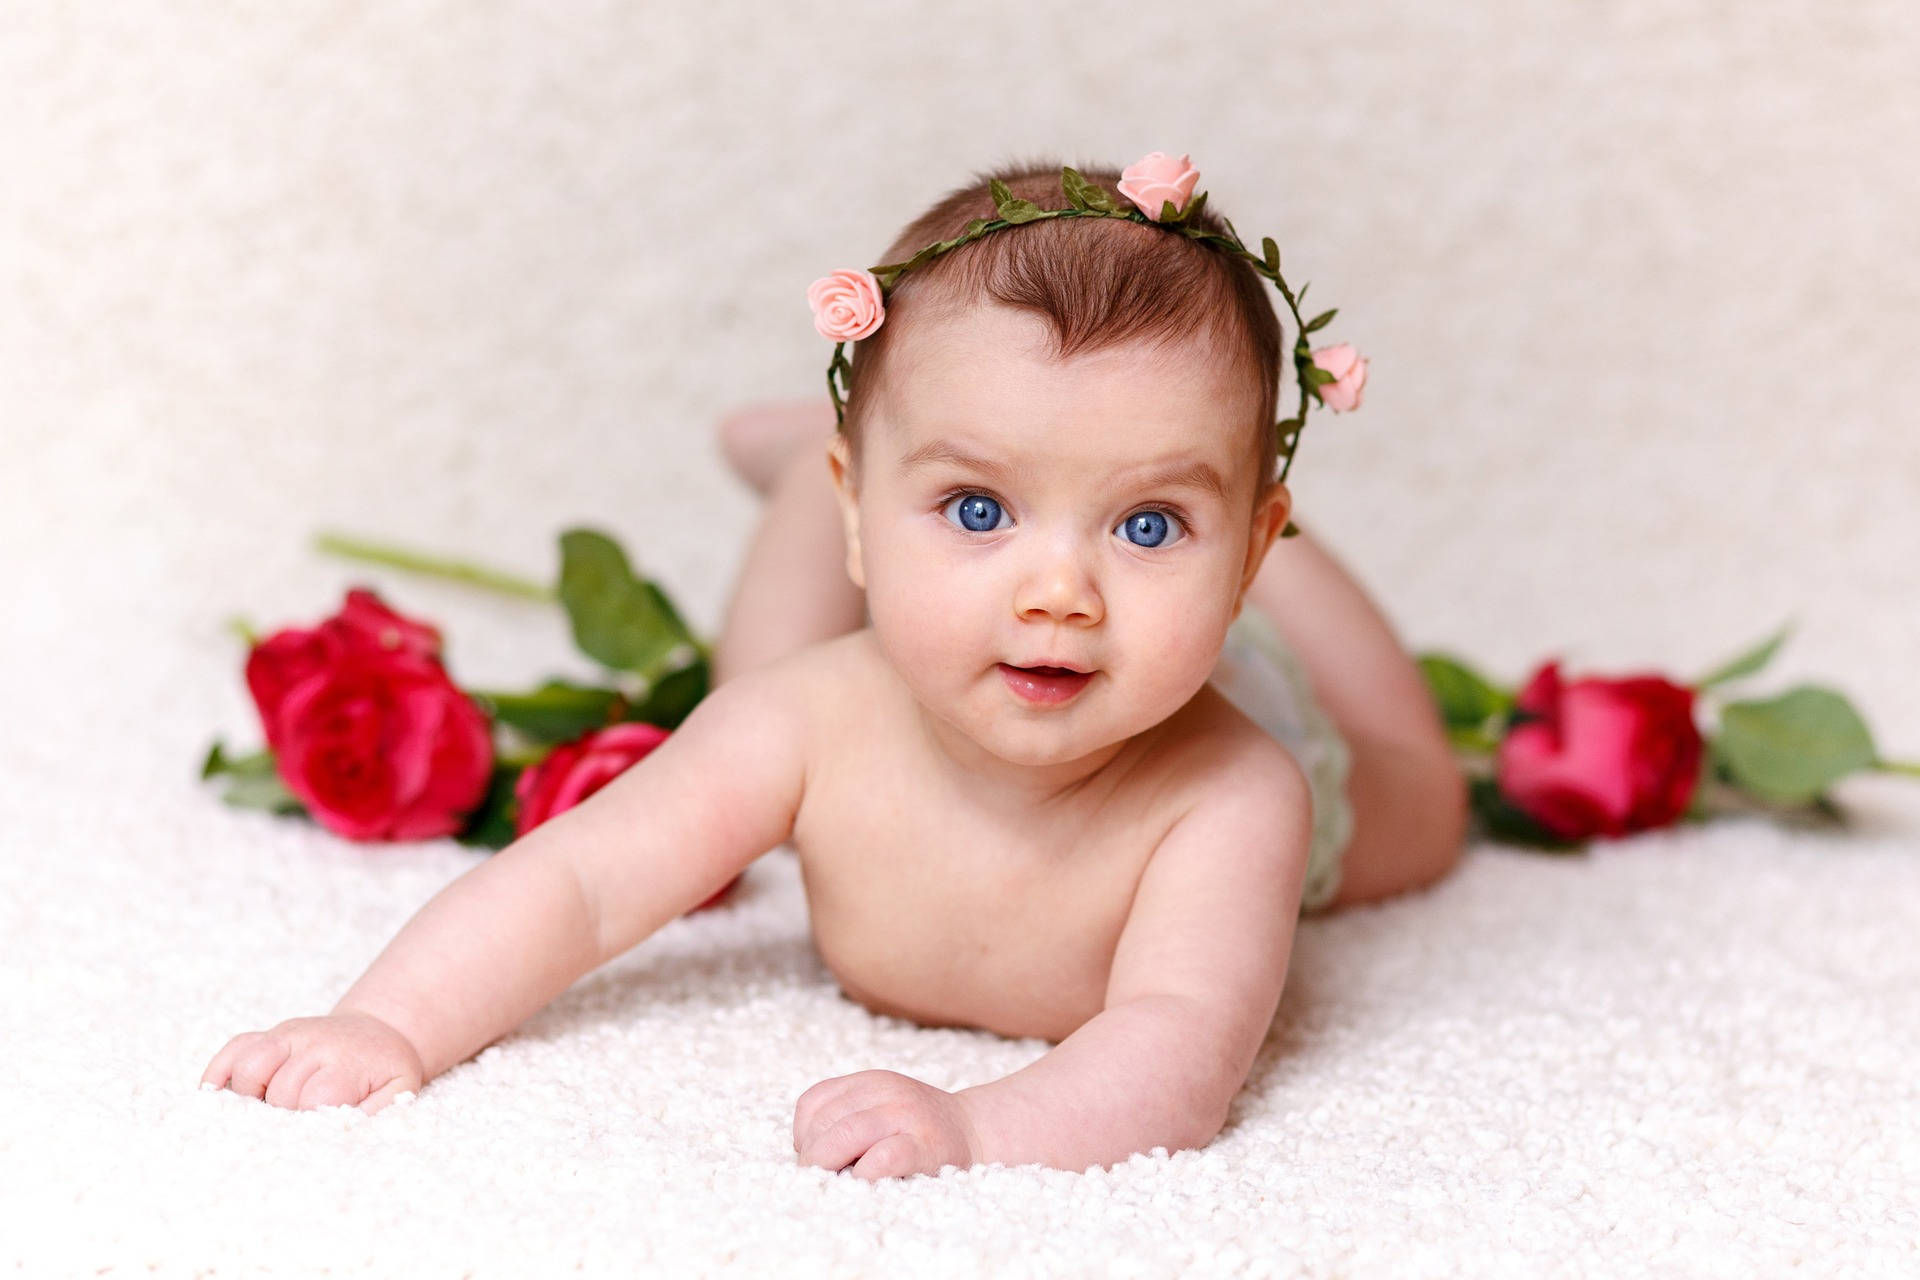 Very Cute Baby With Red Roses